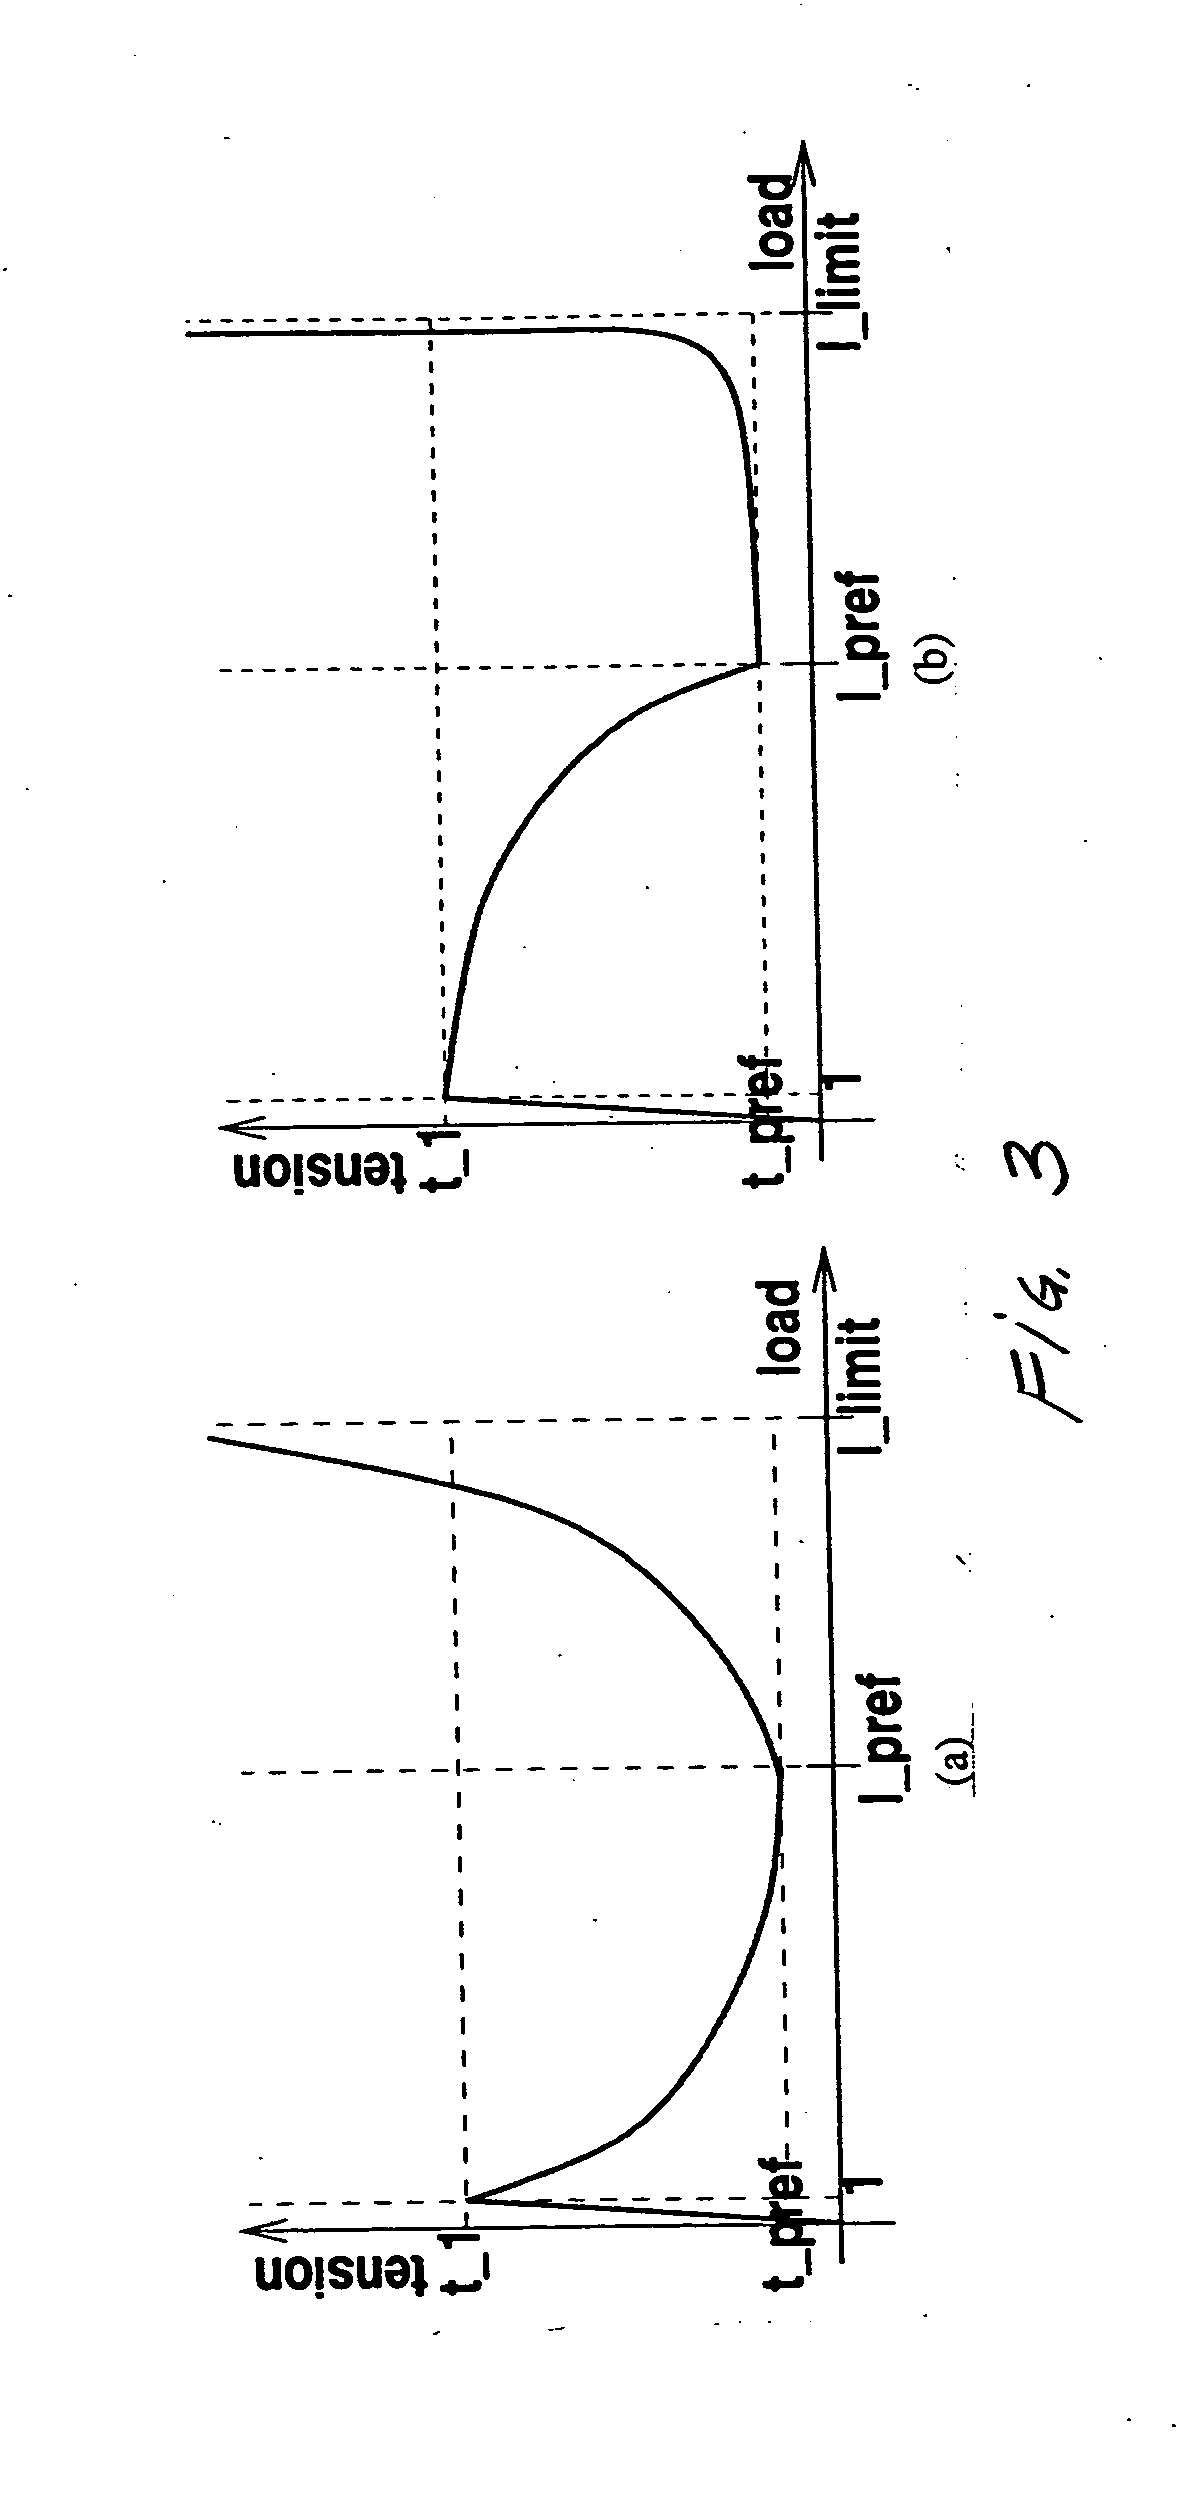 Resource-aware adaptive multicasting in a shared proxy overlay network